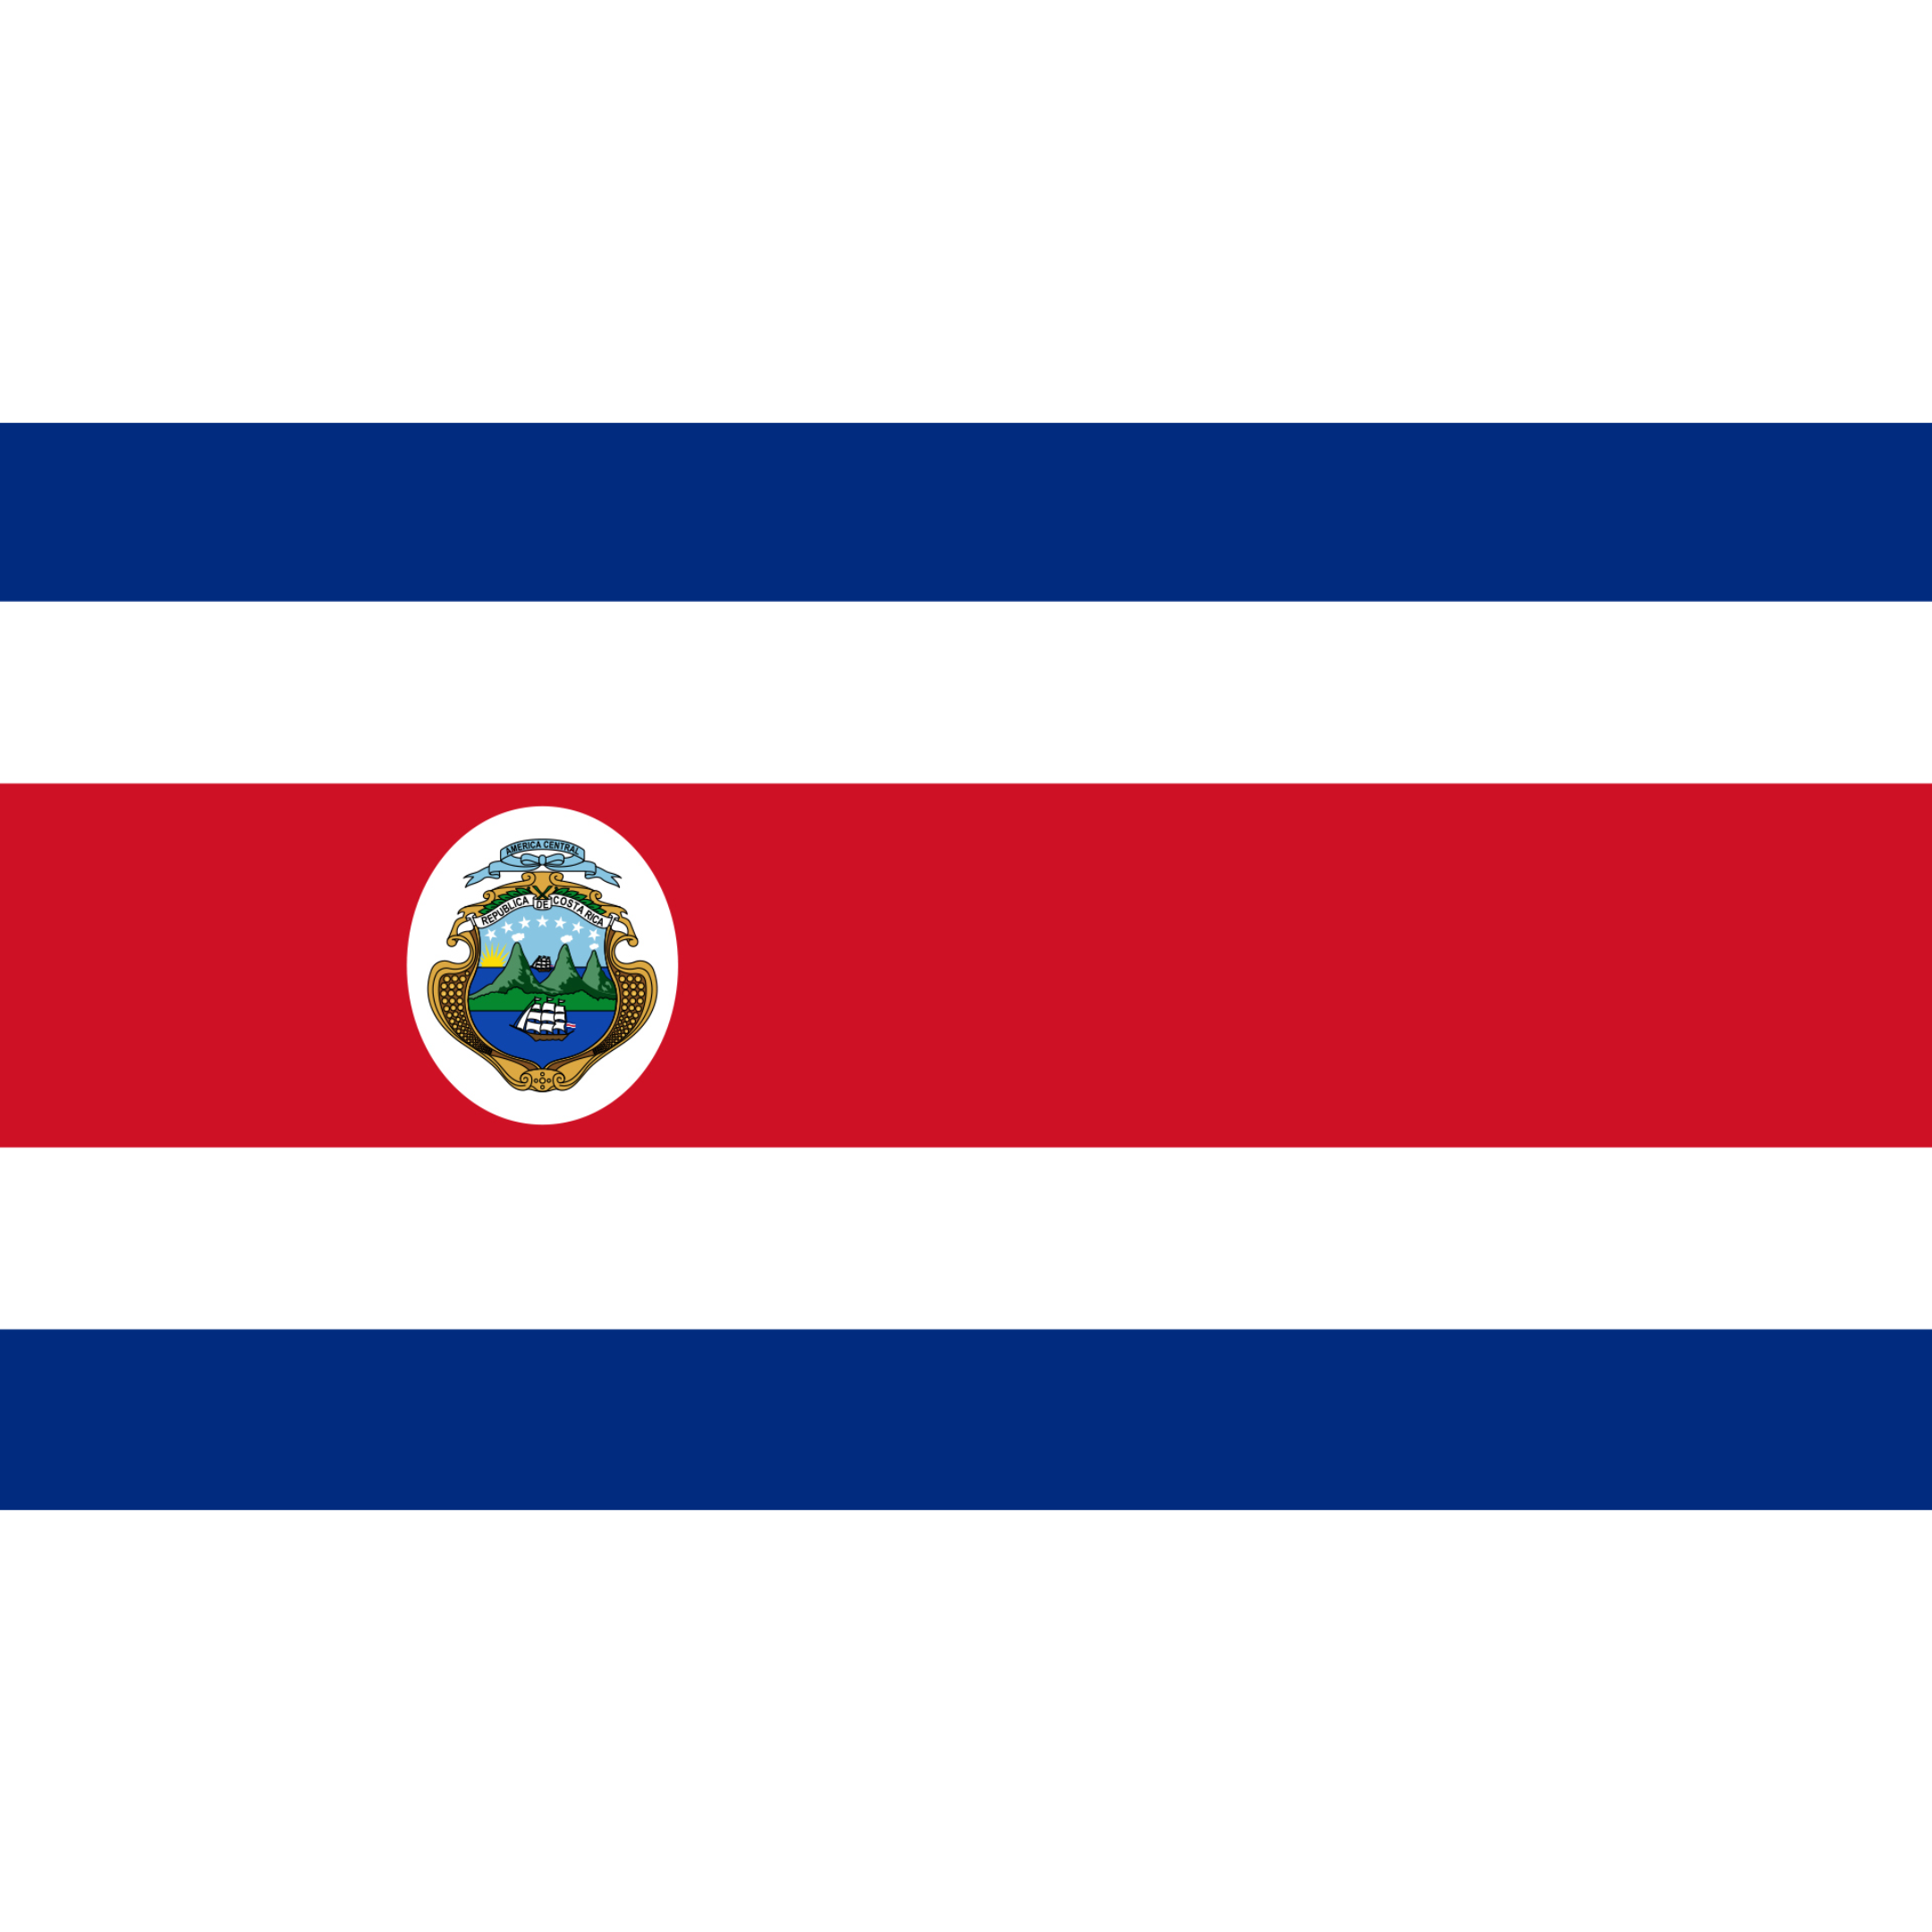 Costa Rica's flag has 2 blue stripes, 2 white stripes and a central double width red stripe with a coat of arms to the left. 